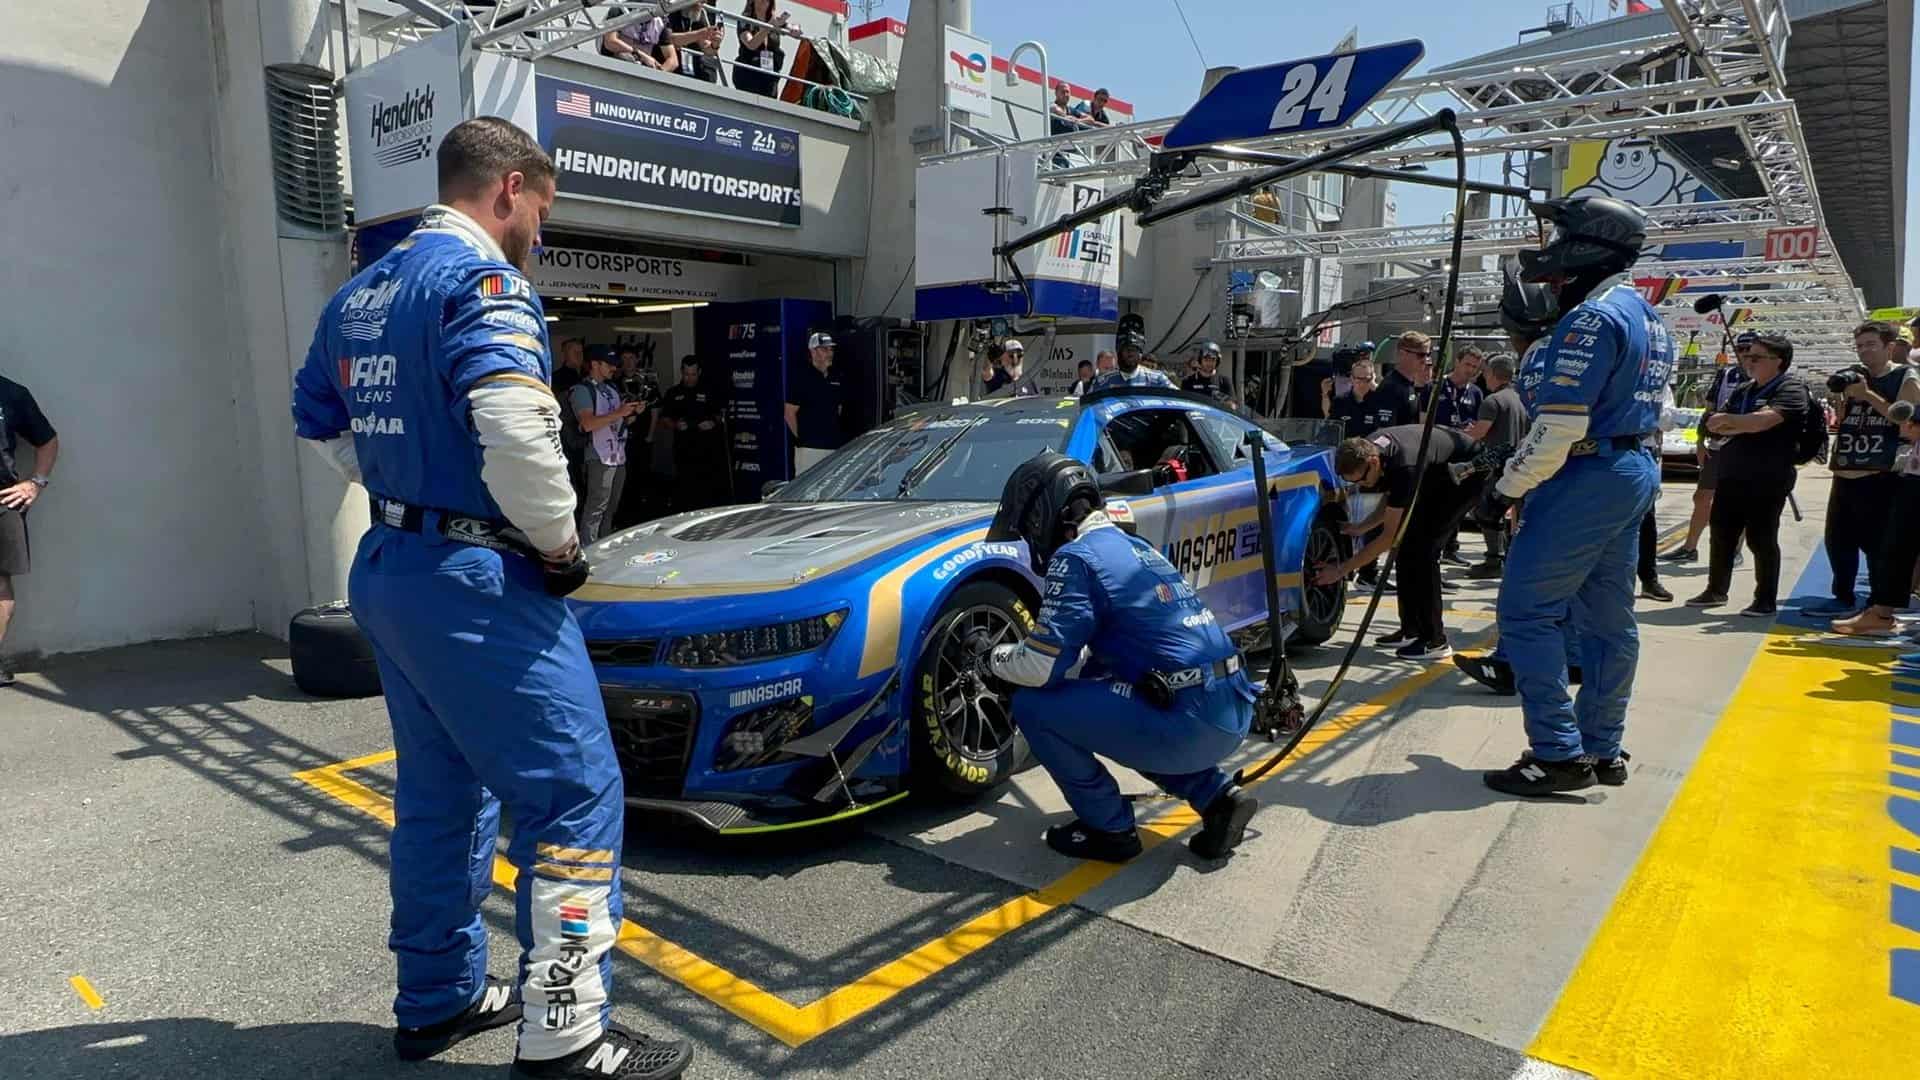 The Hendrick Motorsports fielded NASCAR Garage 56 car won the 24 Hours of Le Mans pit crew competition.